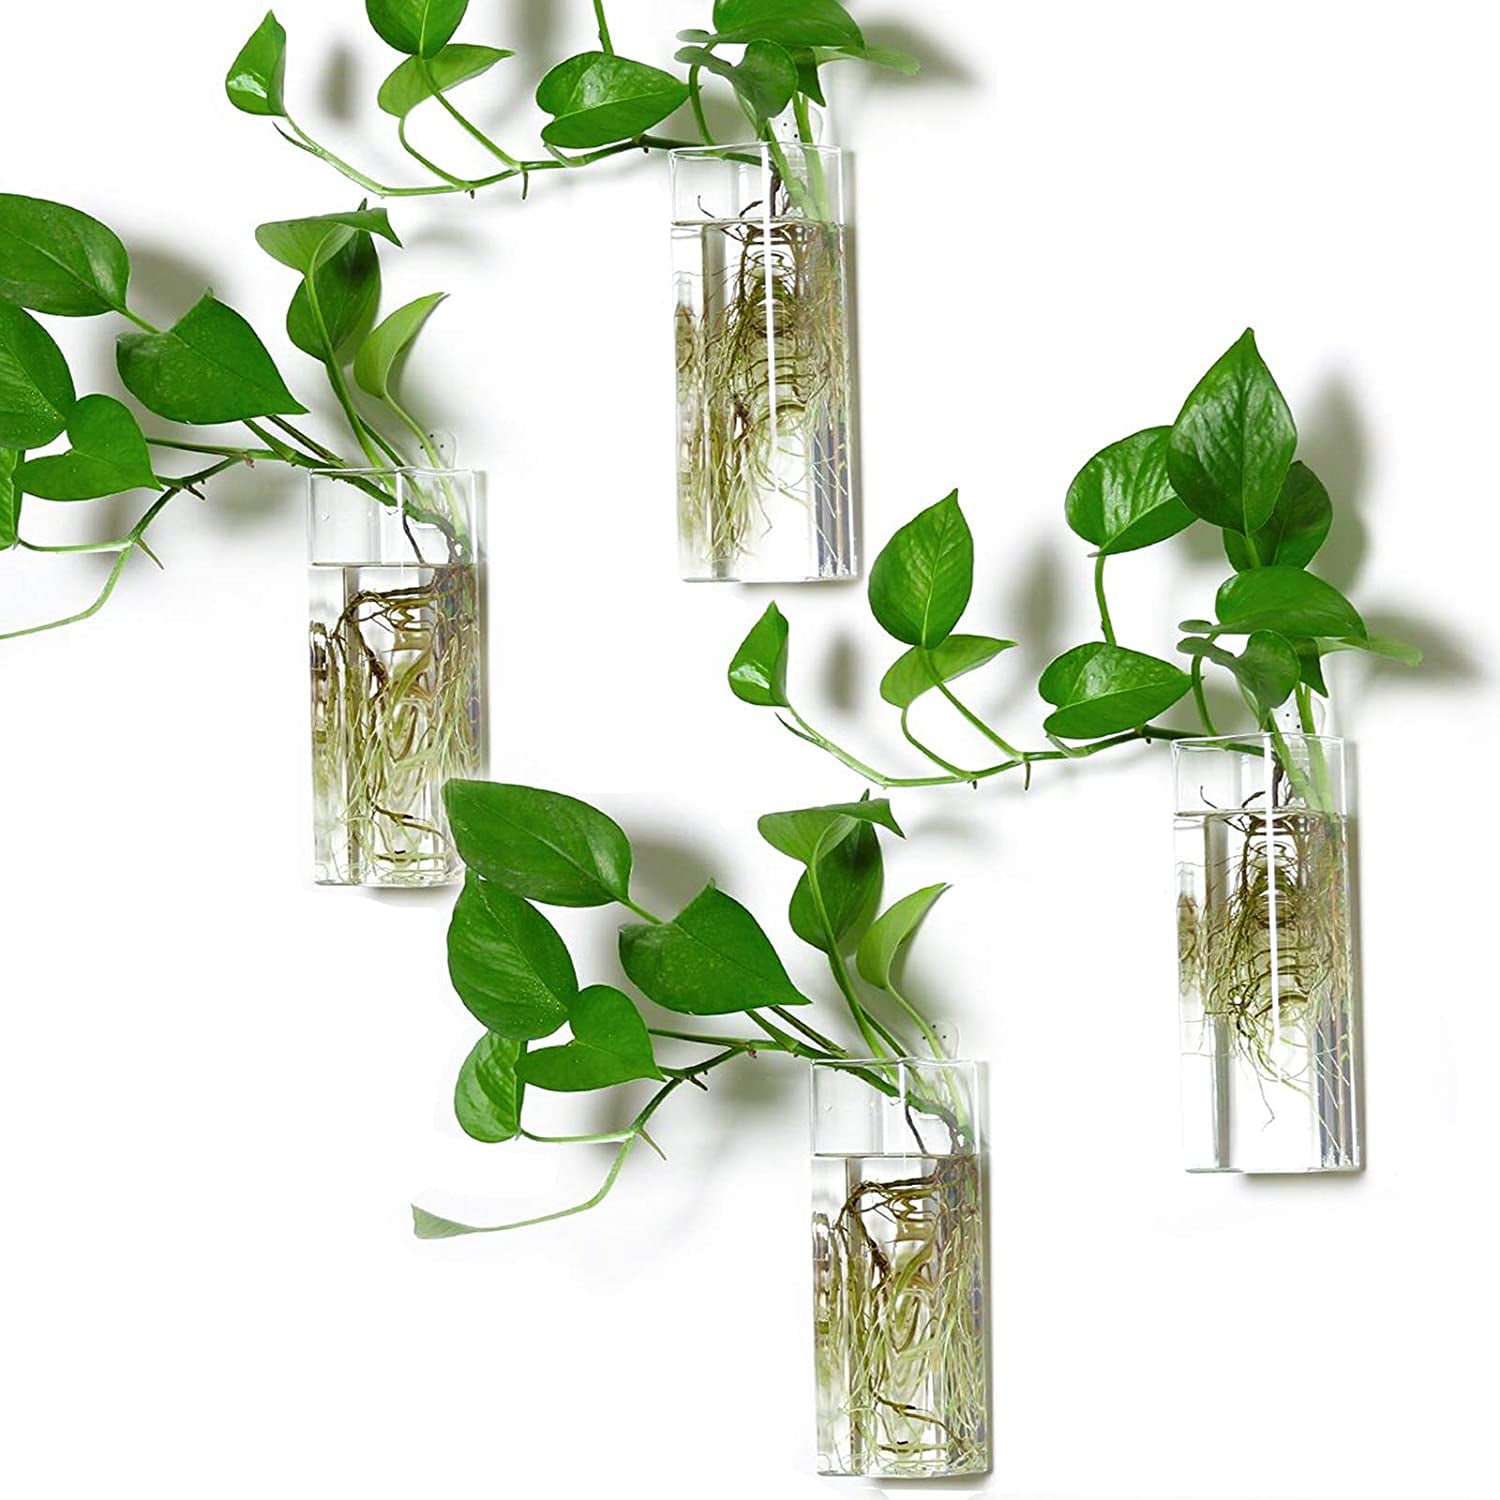 Kingbuy, Kingbuy Wall Hanging Glass Plant Terrarium Container Cylinder Shape.4Pcs Planter Air Decorations for Home Decor